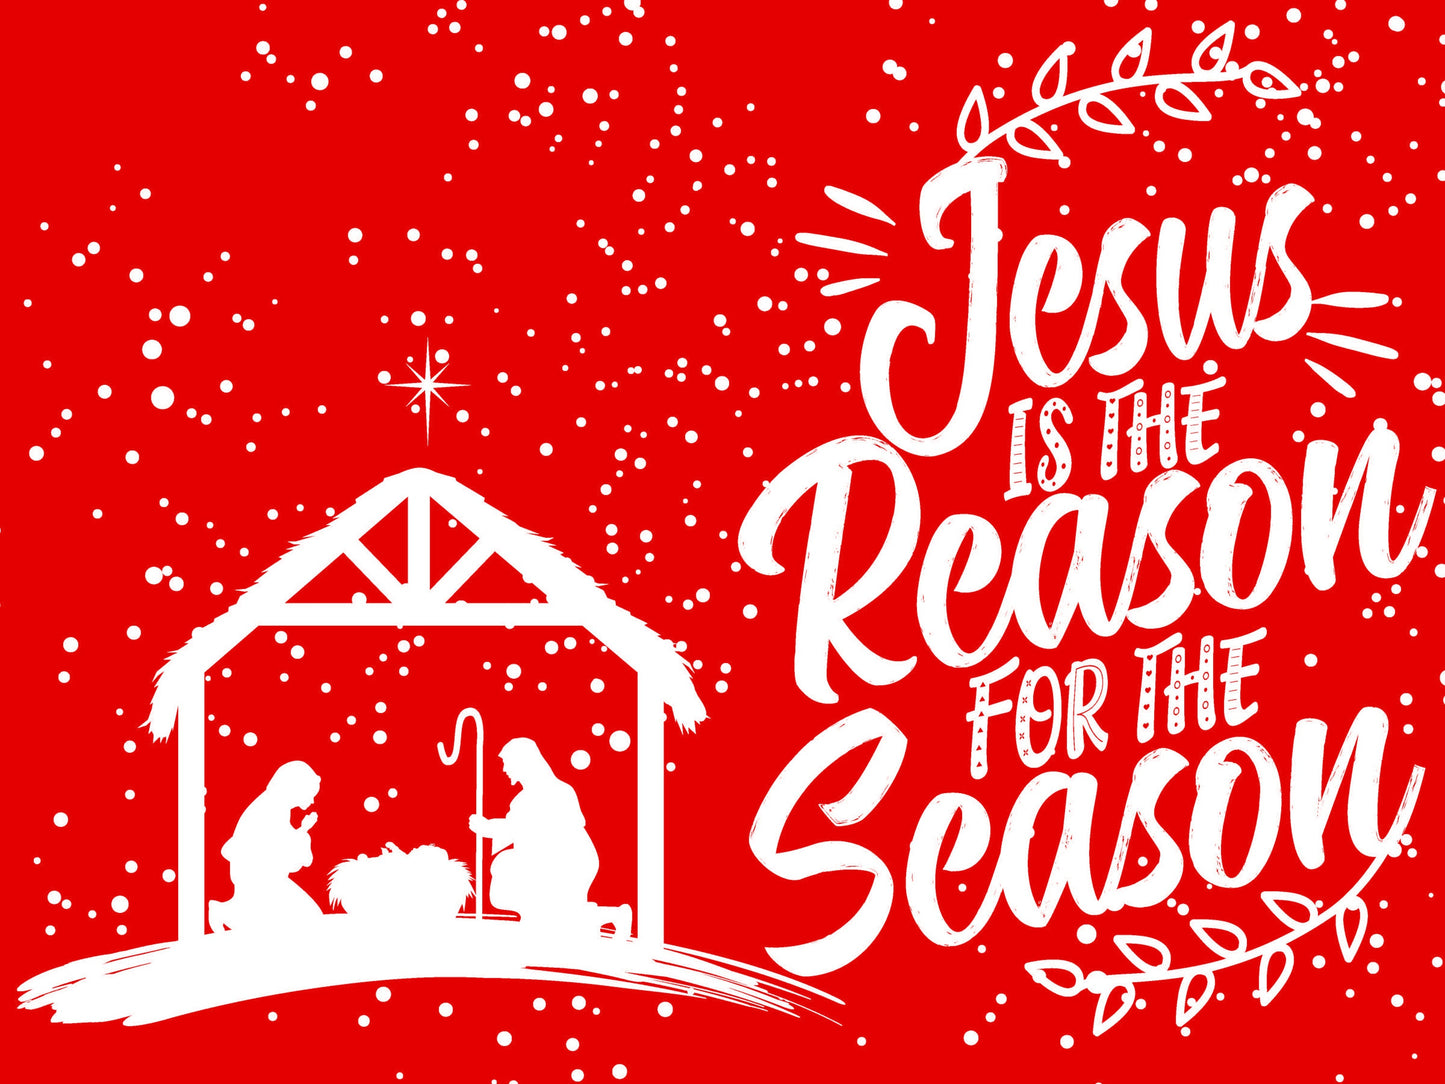 Jesus is the Reason Christmas Yard Sign - Red - 18X24" with Stake - Fast Free Shipping!